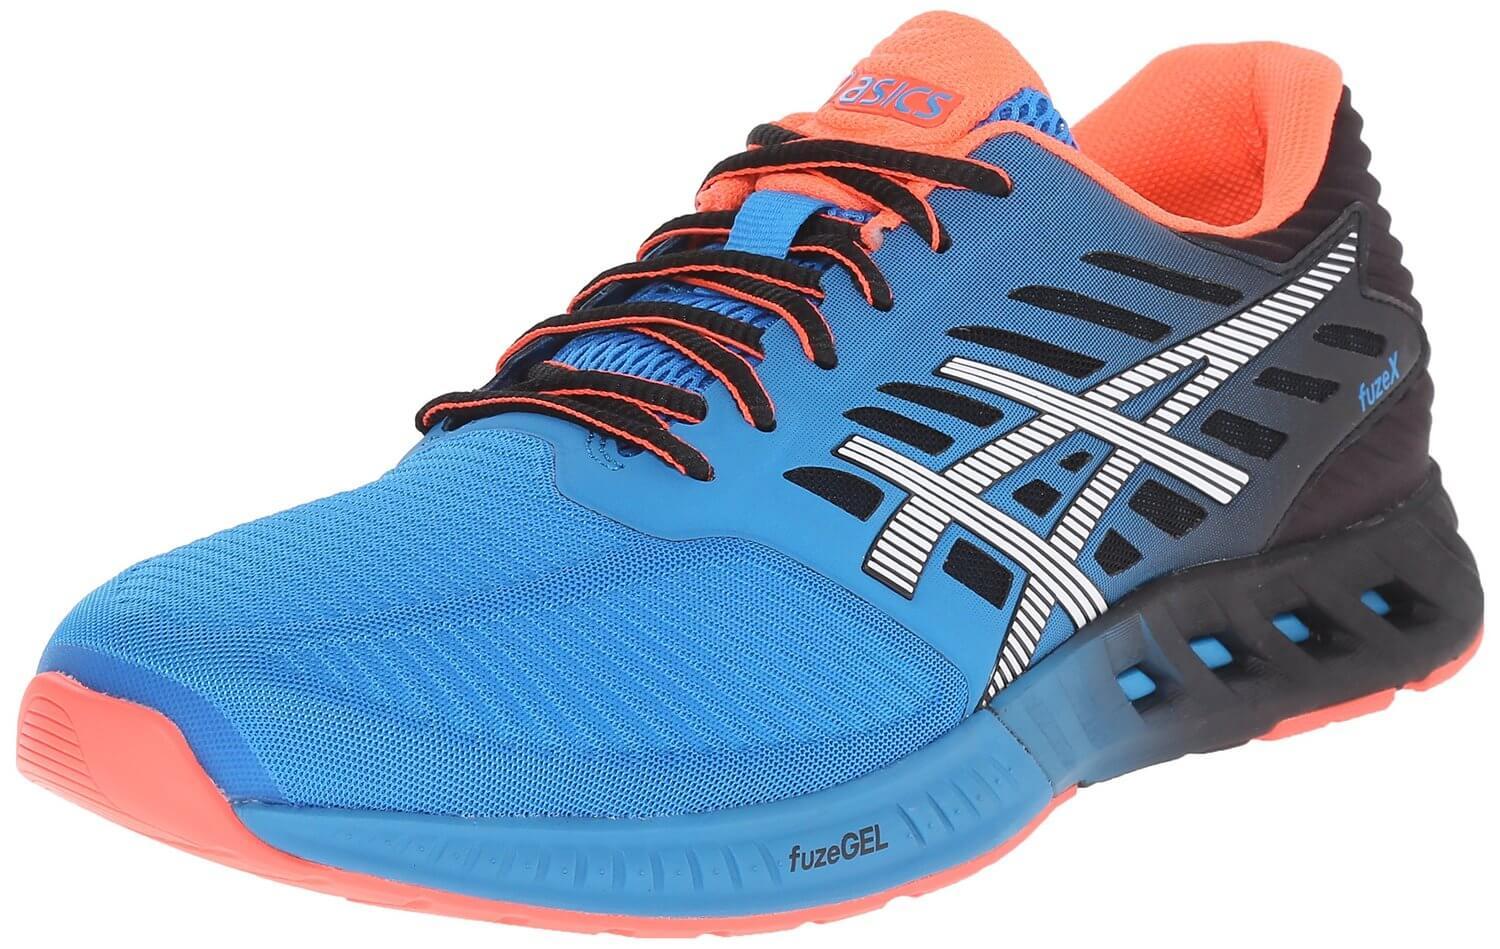 The Asics FuzeX is a fascinating new take on a cushioned running shoe.